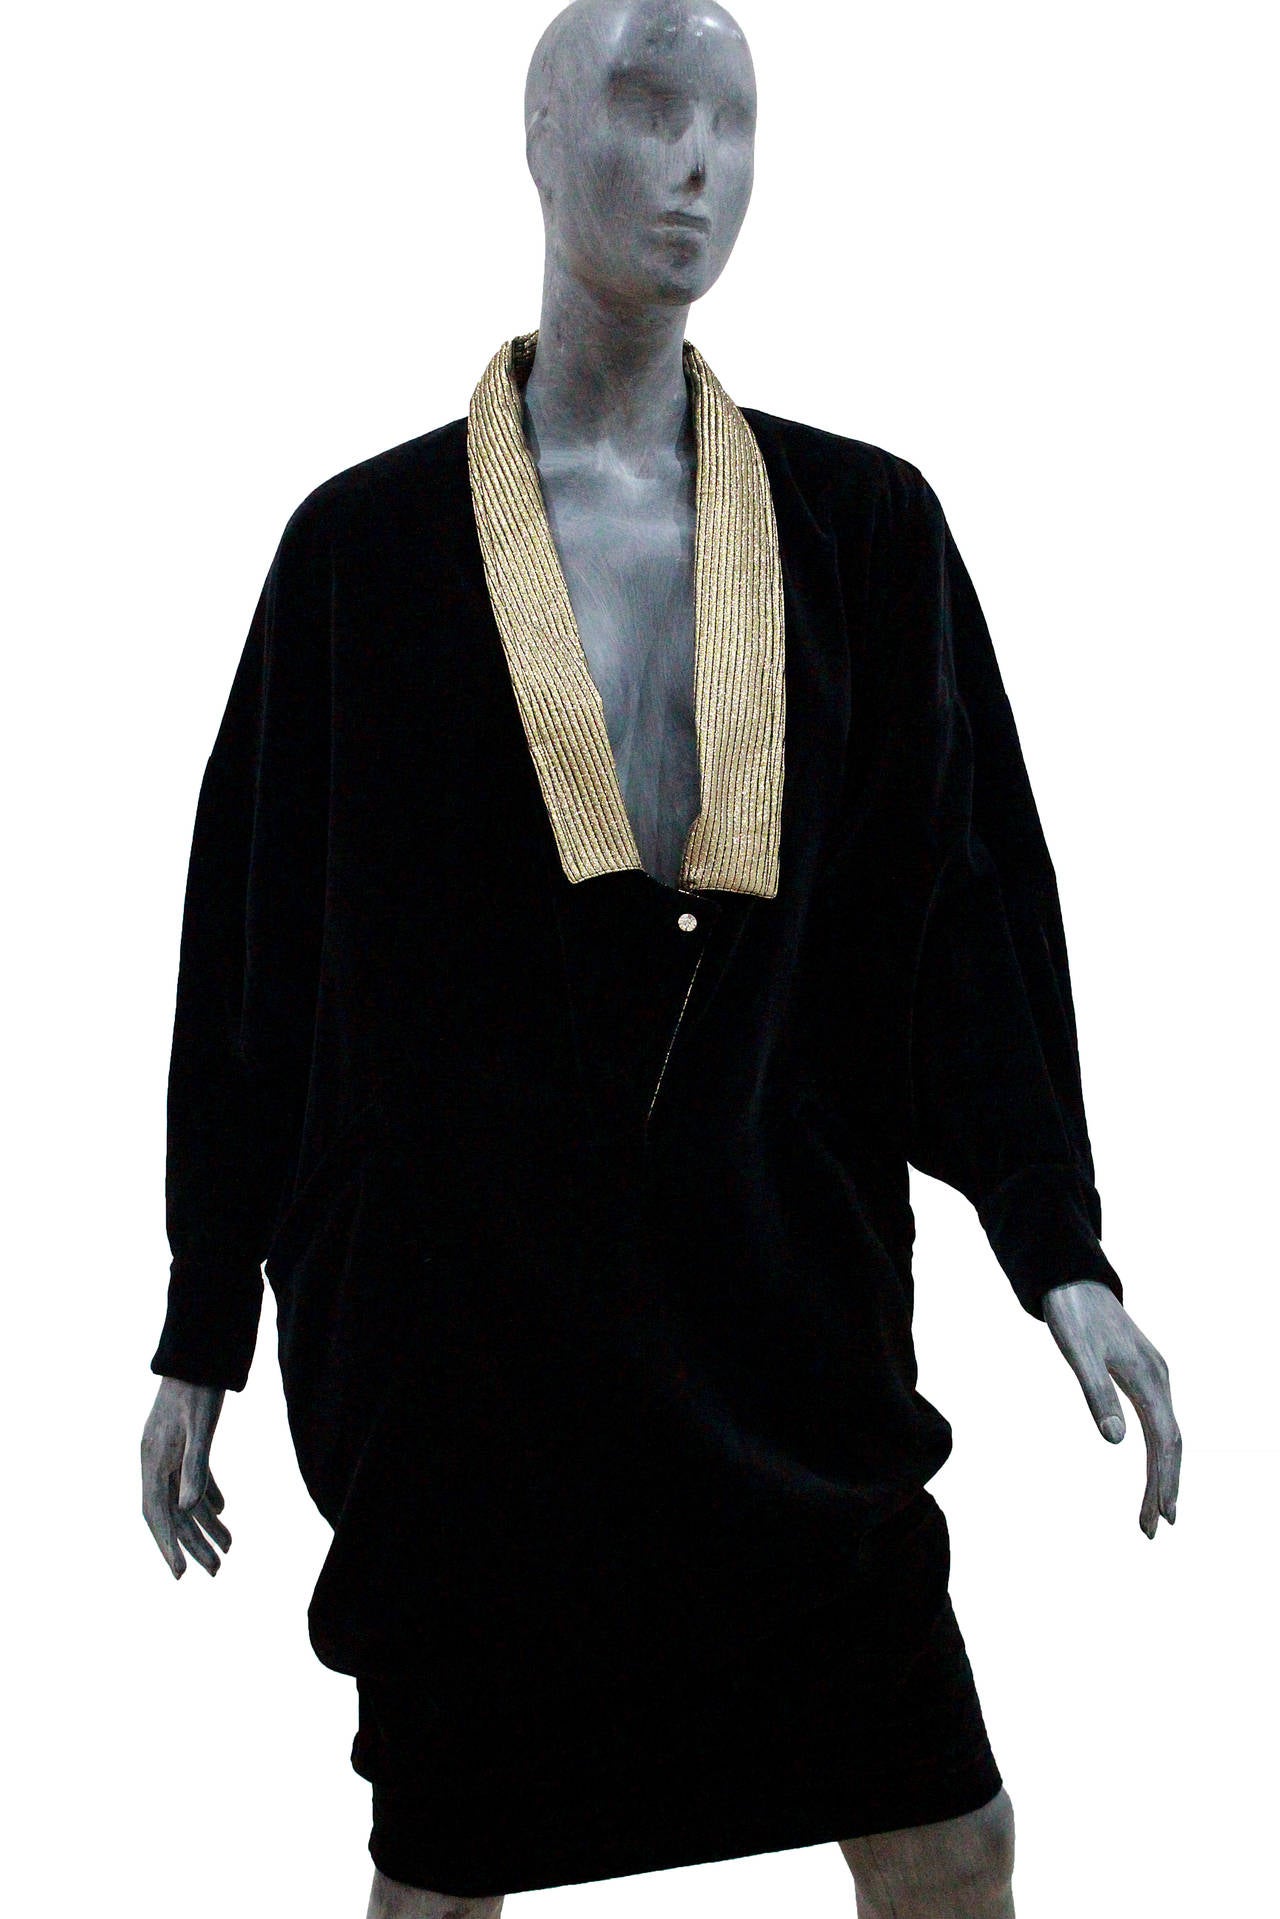 This is a classic Gianni Versace dress made from black velvet with a low plunge neckline, metallic gold collar and diamante buttons on collar and cuffs. 

1980s

Size 42